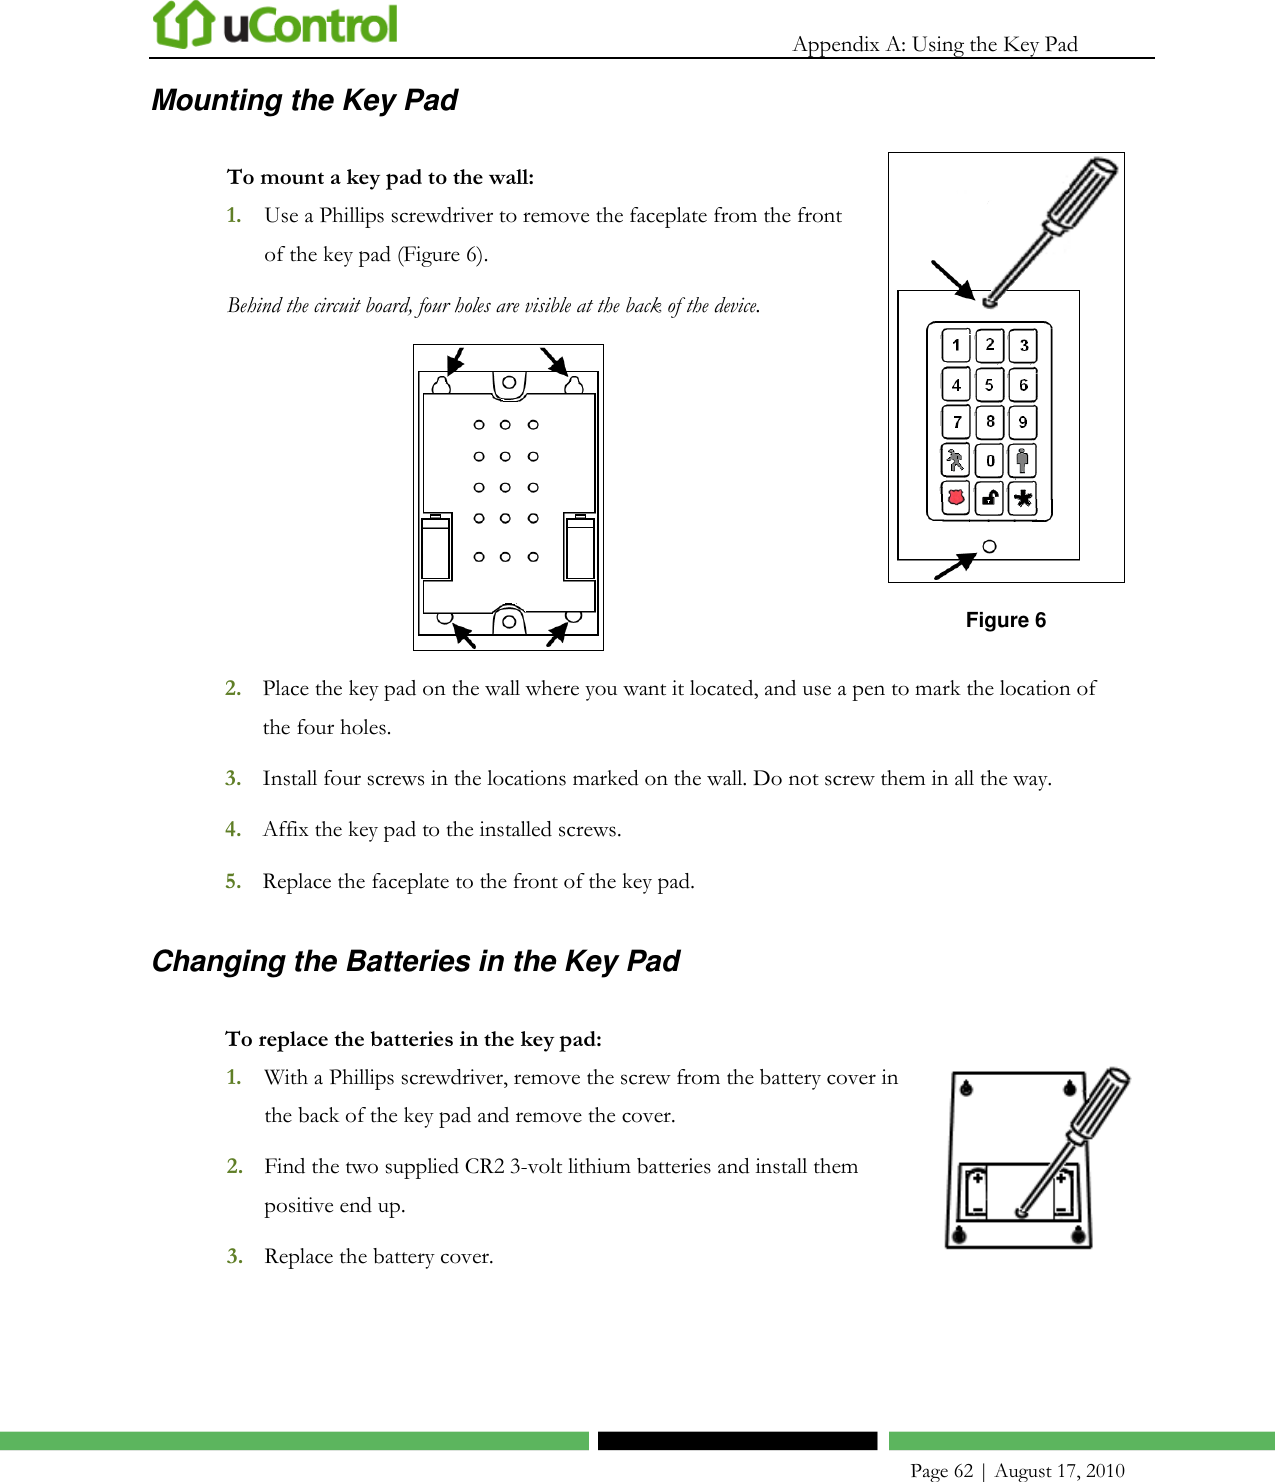   Appendix A: Using the Key Pad    Page 62 | August 17, 2010 Mounting the Key Pad To mount a key pad to the wall: 1. Use a Phillips screwdriver to remove the faceplate from the front of the key pad (Figure 6). Behind the circuit board, four holes are visible at the back of the device.   Figure 6 2. Place the key pad on the wall where you want it located, and use a pen to mark the location of the four holes. 3. Install four screws in the locations marked on the wall. Do not screw them in all the way. 4. Affix the key pad to the installed screws. 5. Replace the faceplate to the front of the key pad. Changing the Batteries in the Key Pad To replace the batteries in the key pad: 1. With a Phillips screwdriver, remove the screw from the battery cover in the back of the key pad and remove the cover. 2. Find the two supplied CR2 3-volt lithium batteries and install them positive end up. 3. Replace the battery cover.   